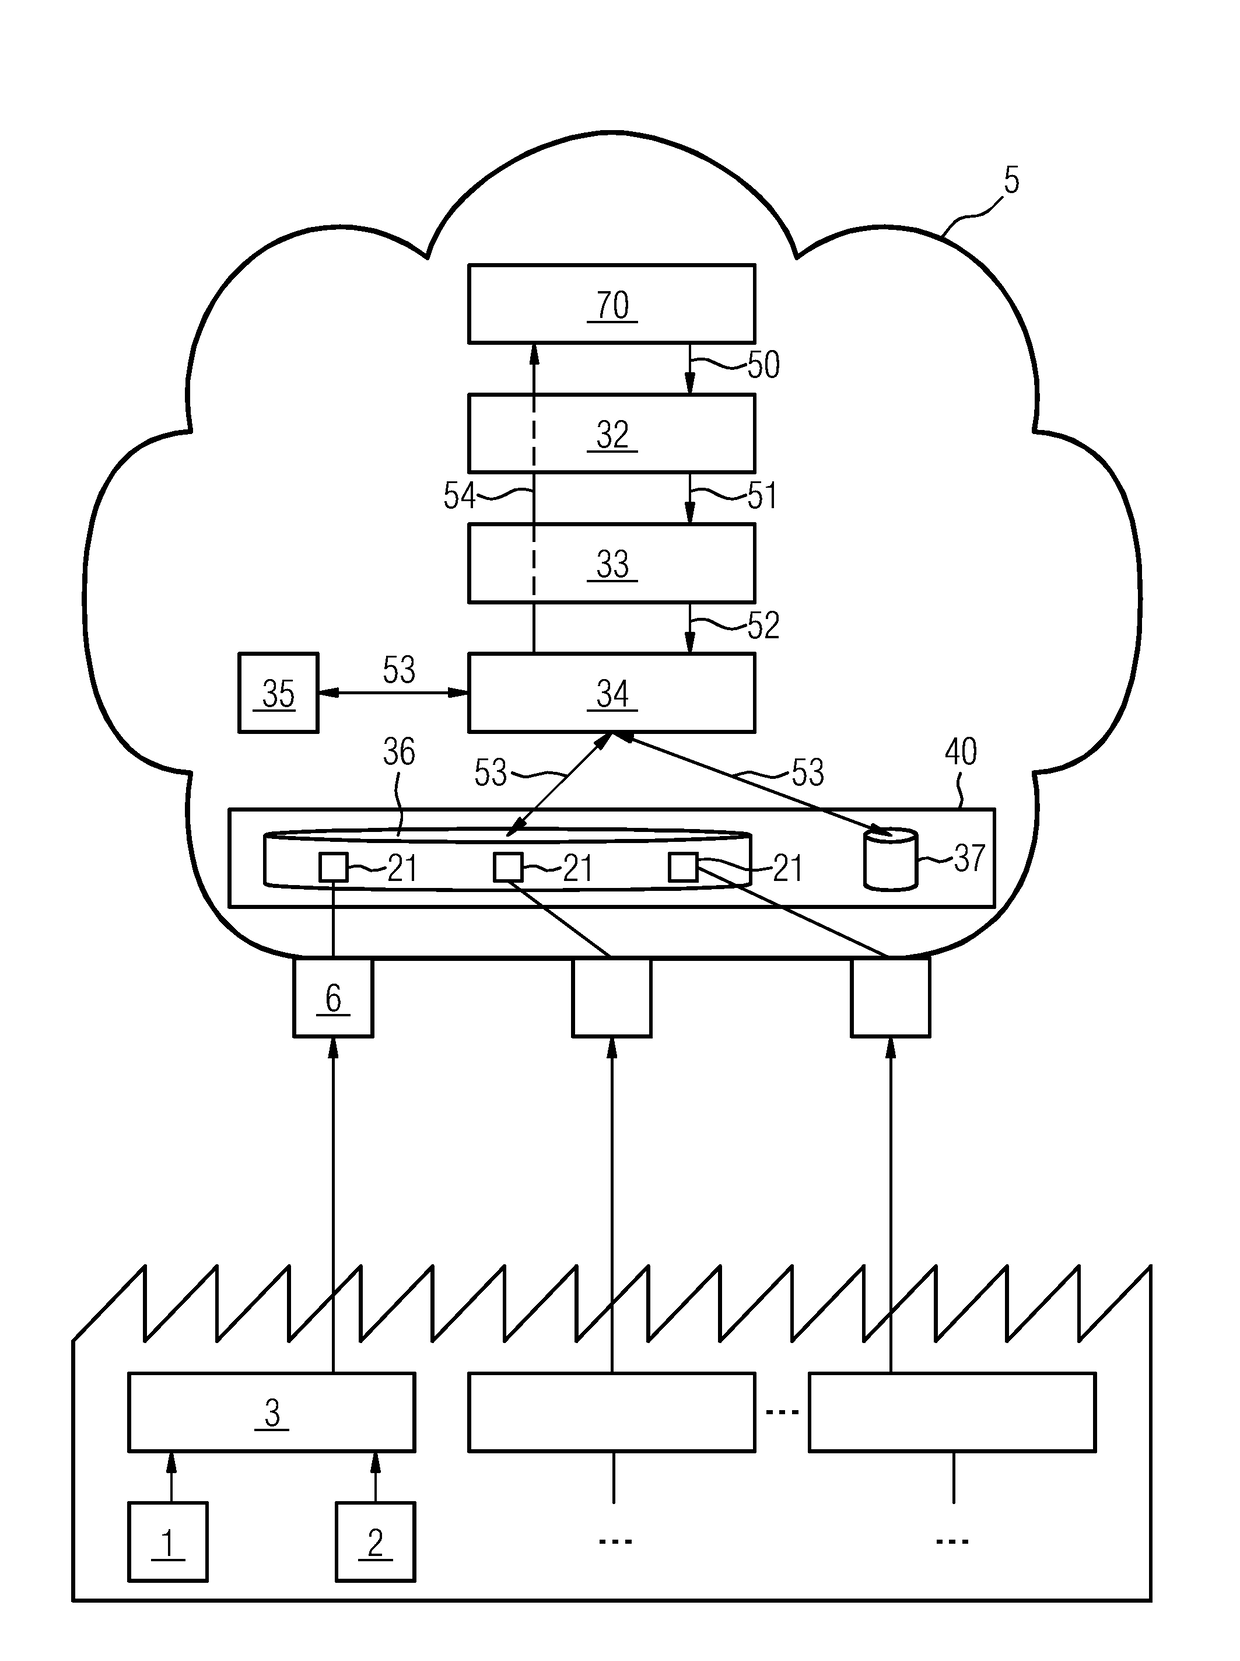 System and method configured to execute data model transformations on data for cloud based applications